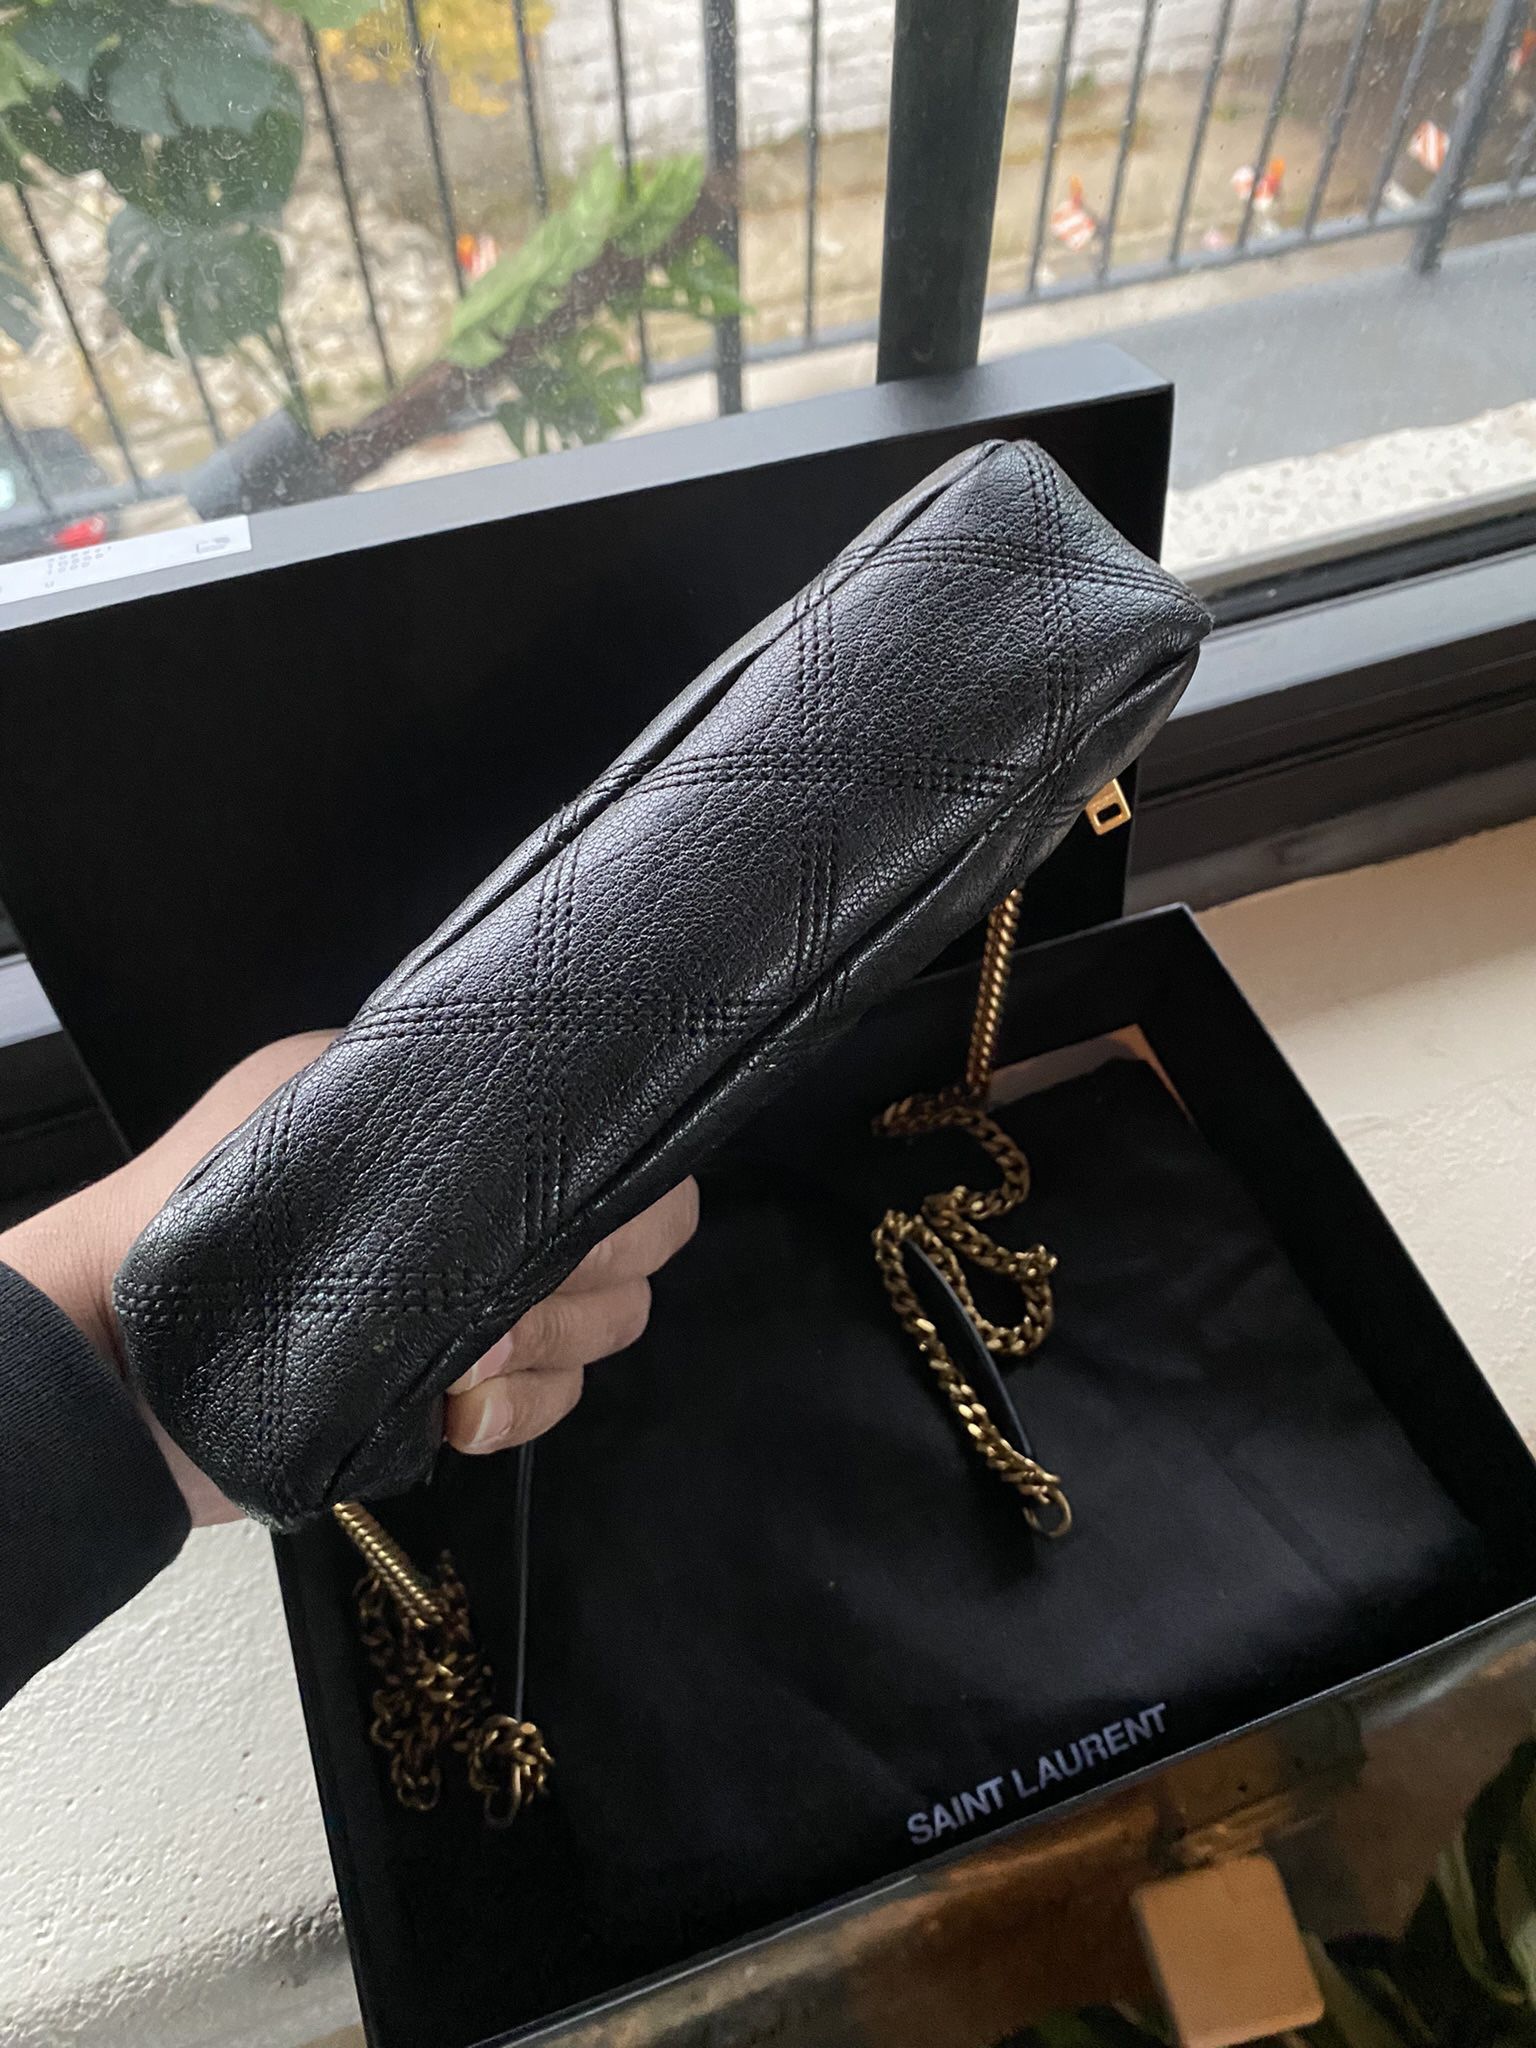 $400 NWT MICHAEL KORS PIPER GOLD STUDDED POCHETTE ZIP CHAIN LOGO SHOULDER  BAG for Sale in Lake In The Hills, IL - OfferUp